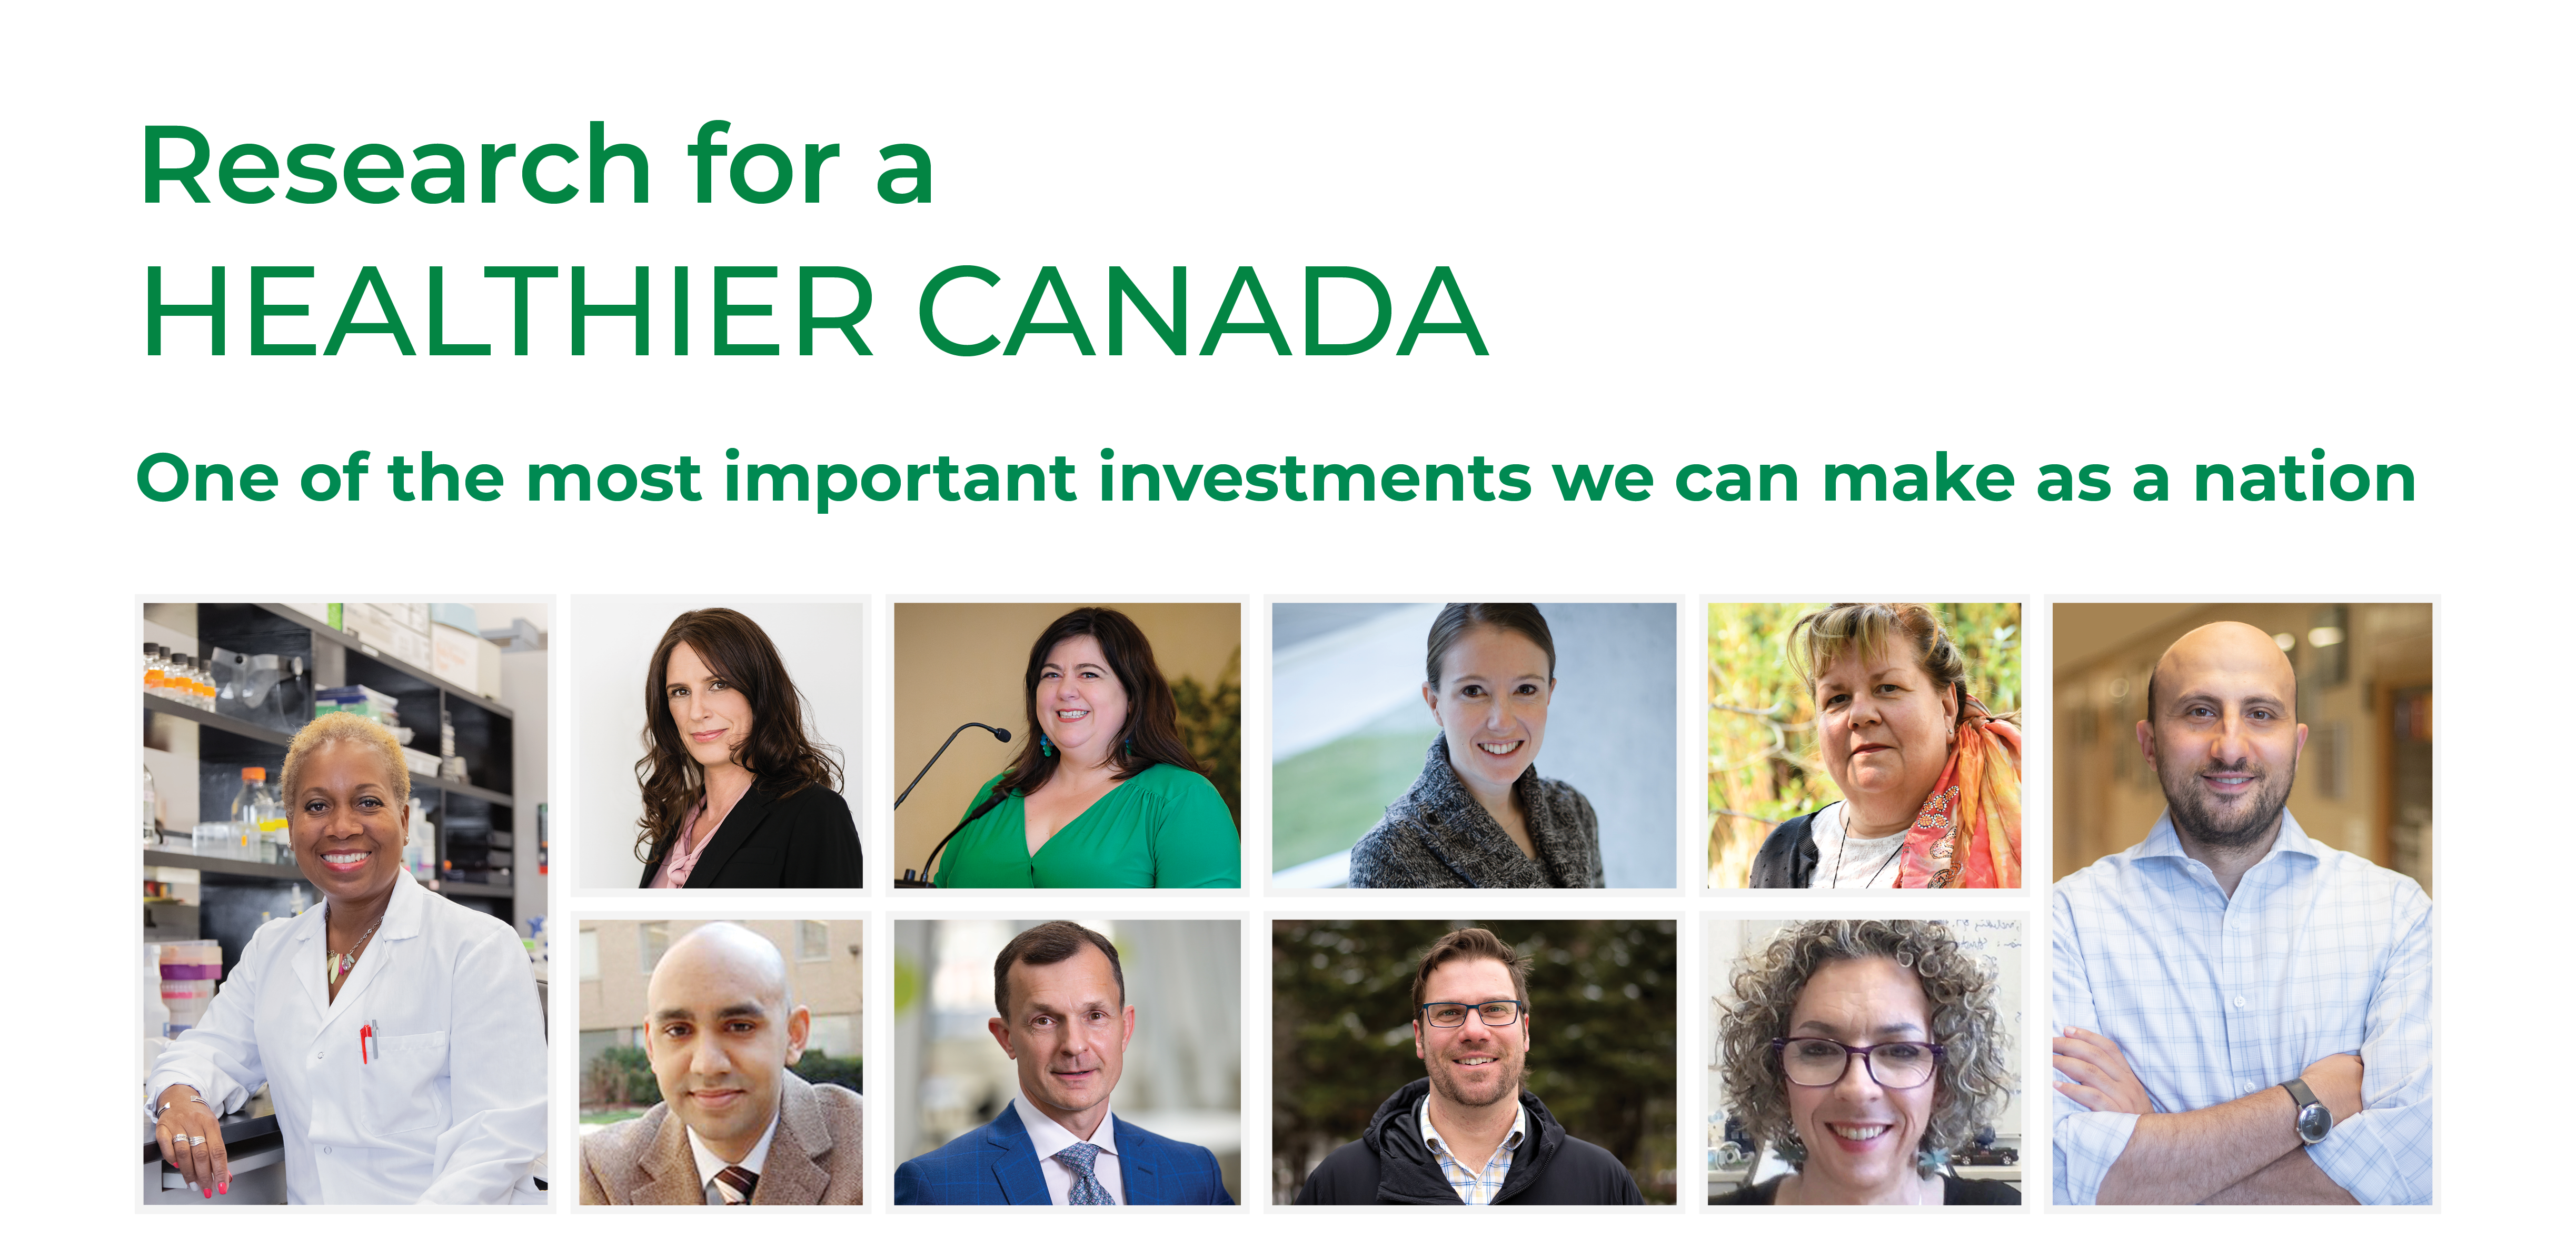 Research for a healthier Canada: One of the most important investments we can make as a nation